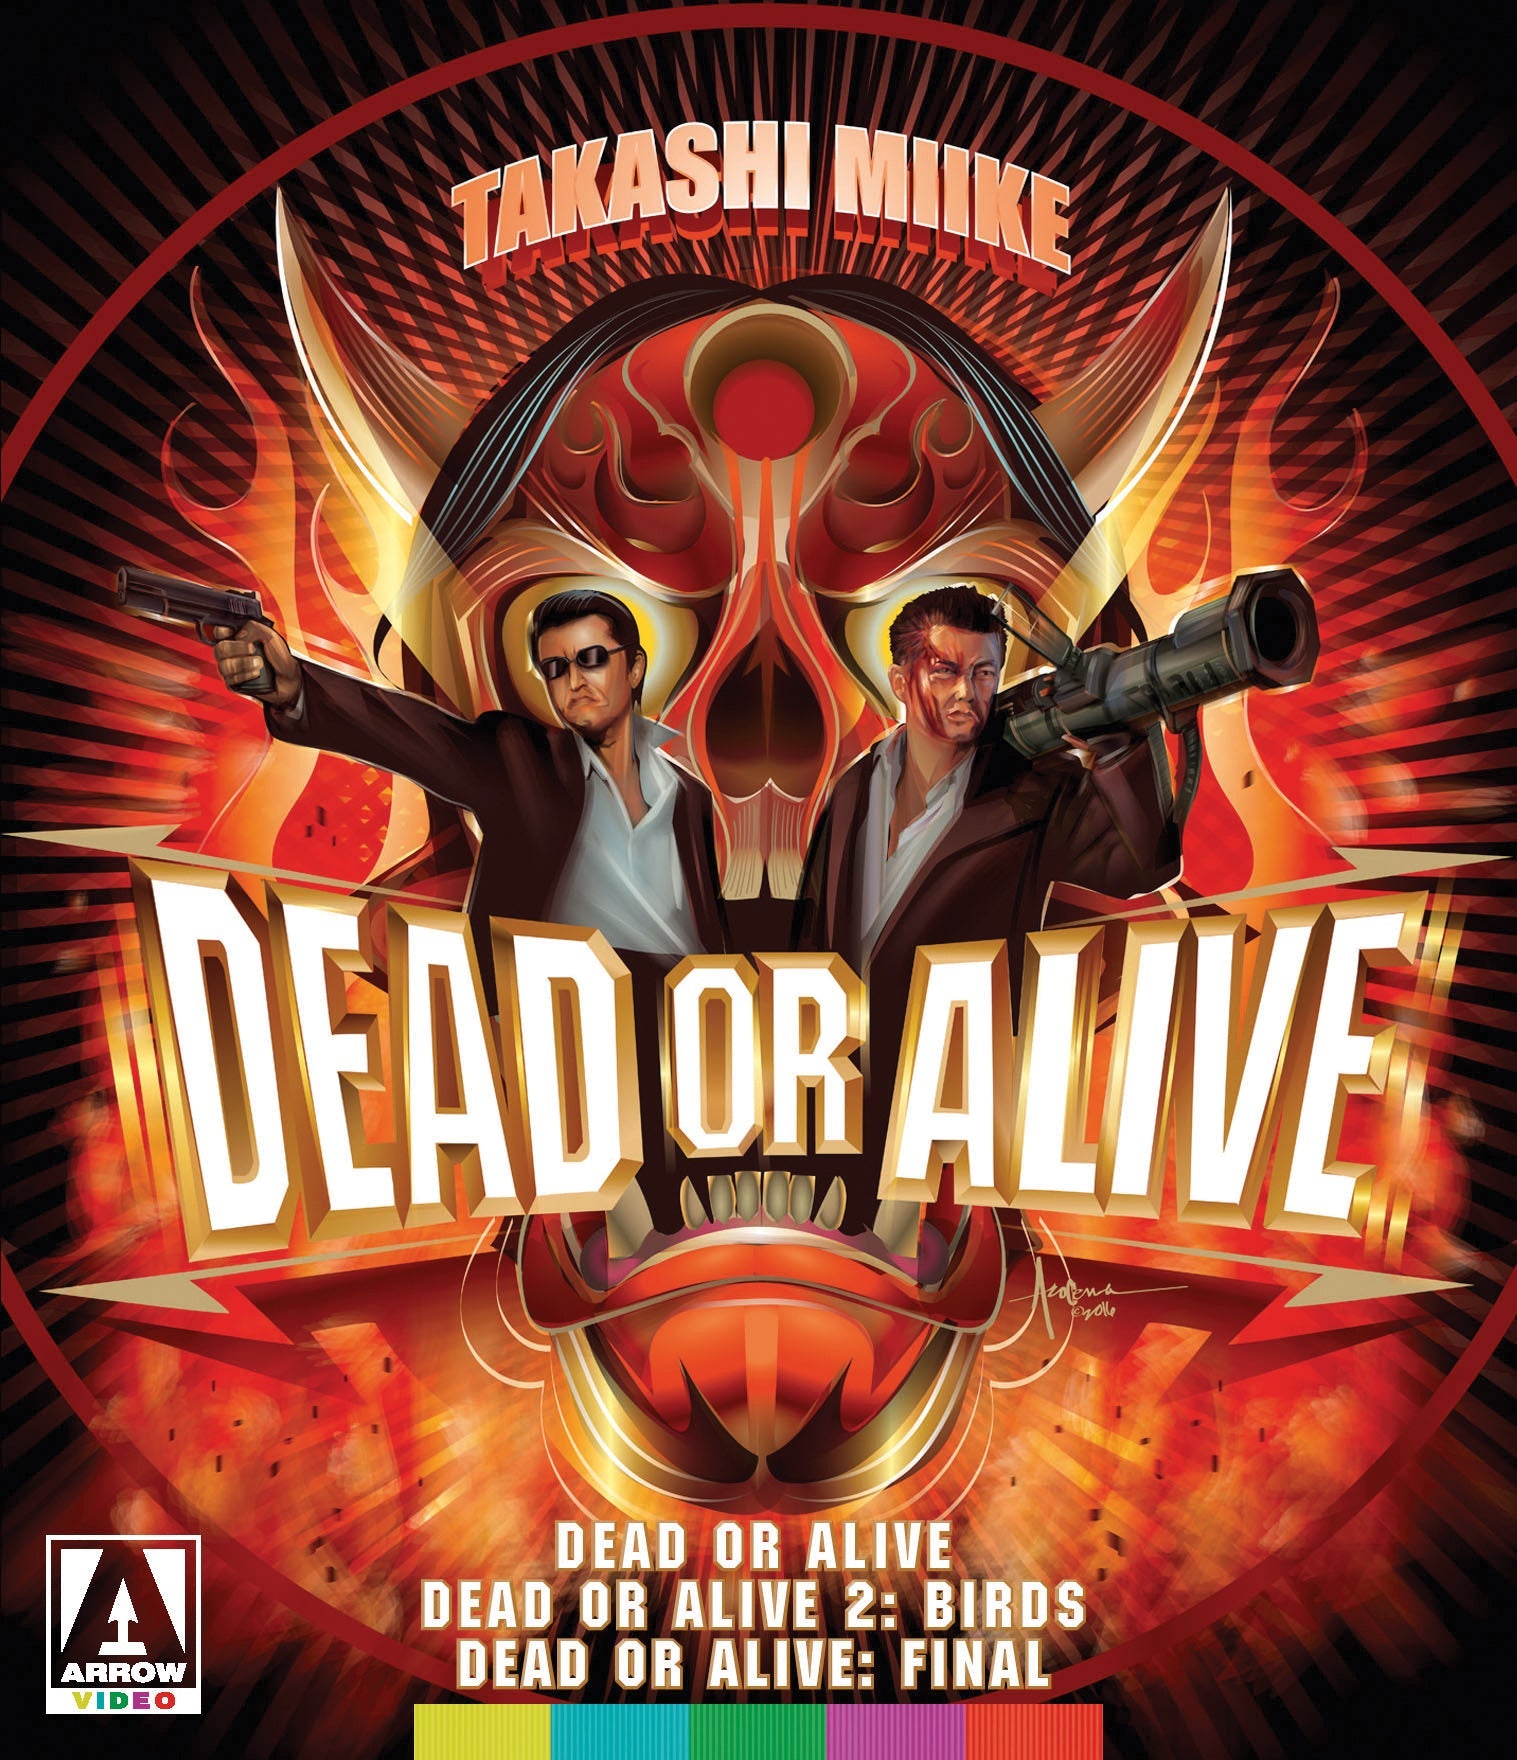 Dead Or Alive Trilogy Blu-Ray Blu-Ray